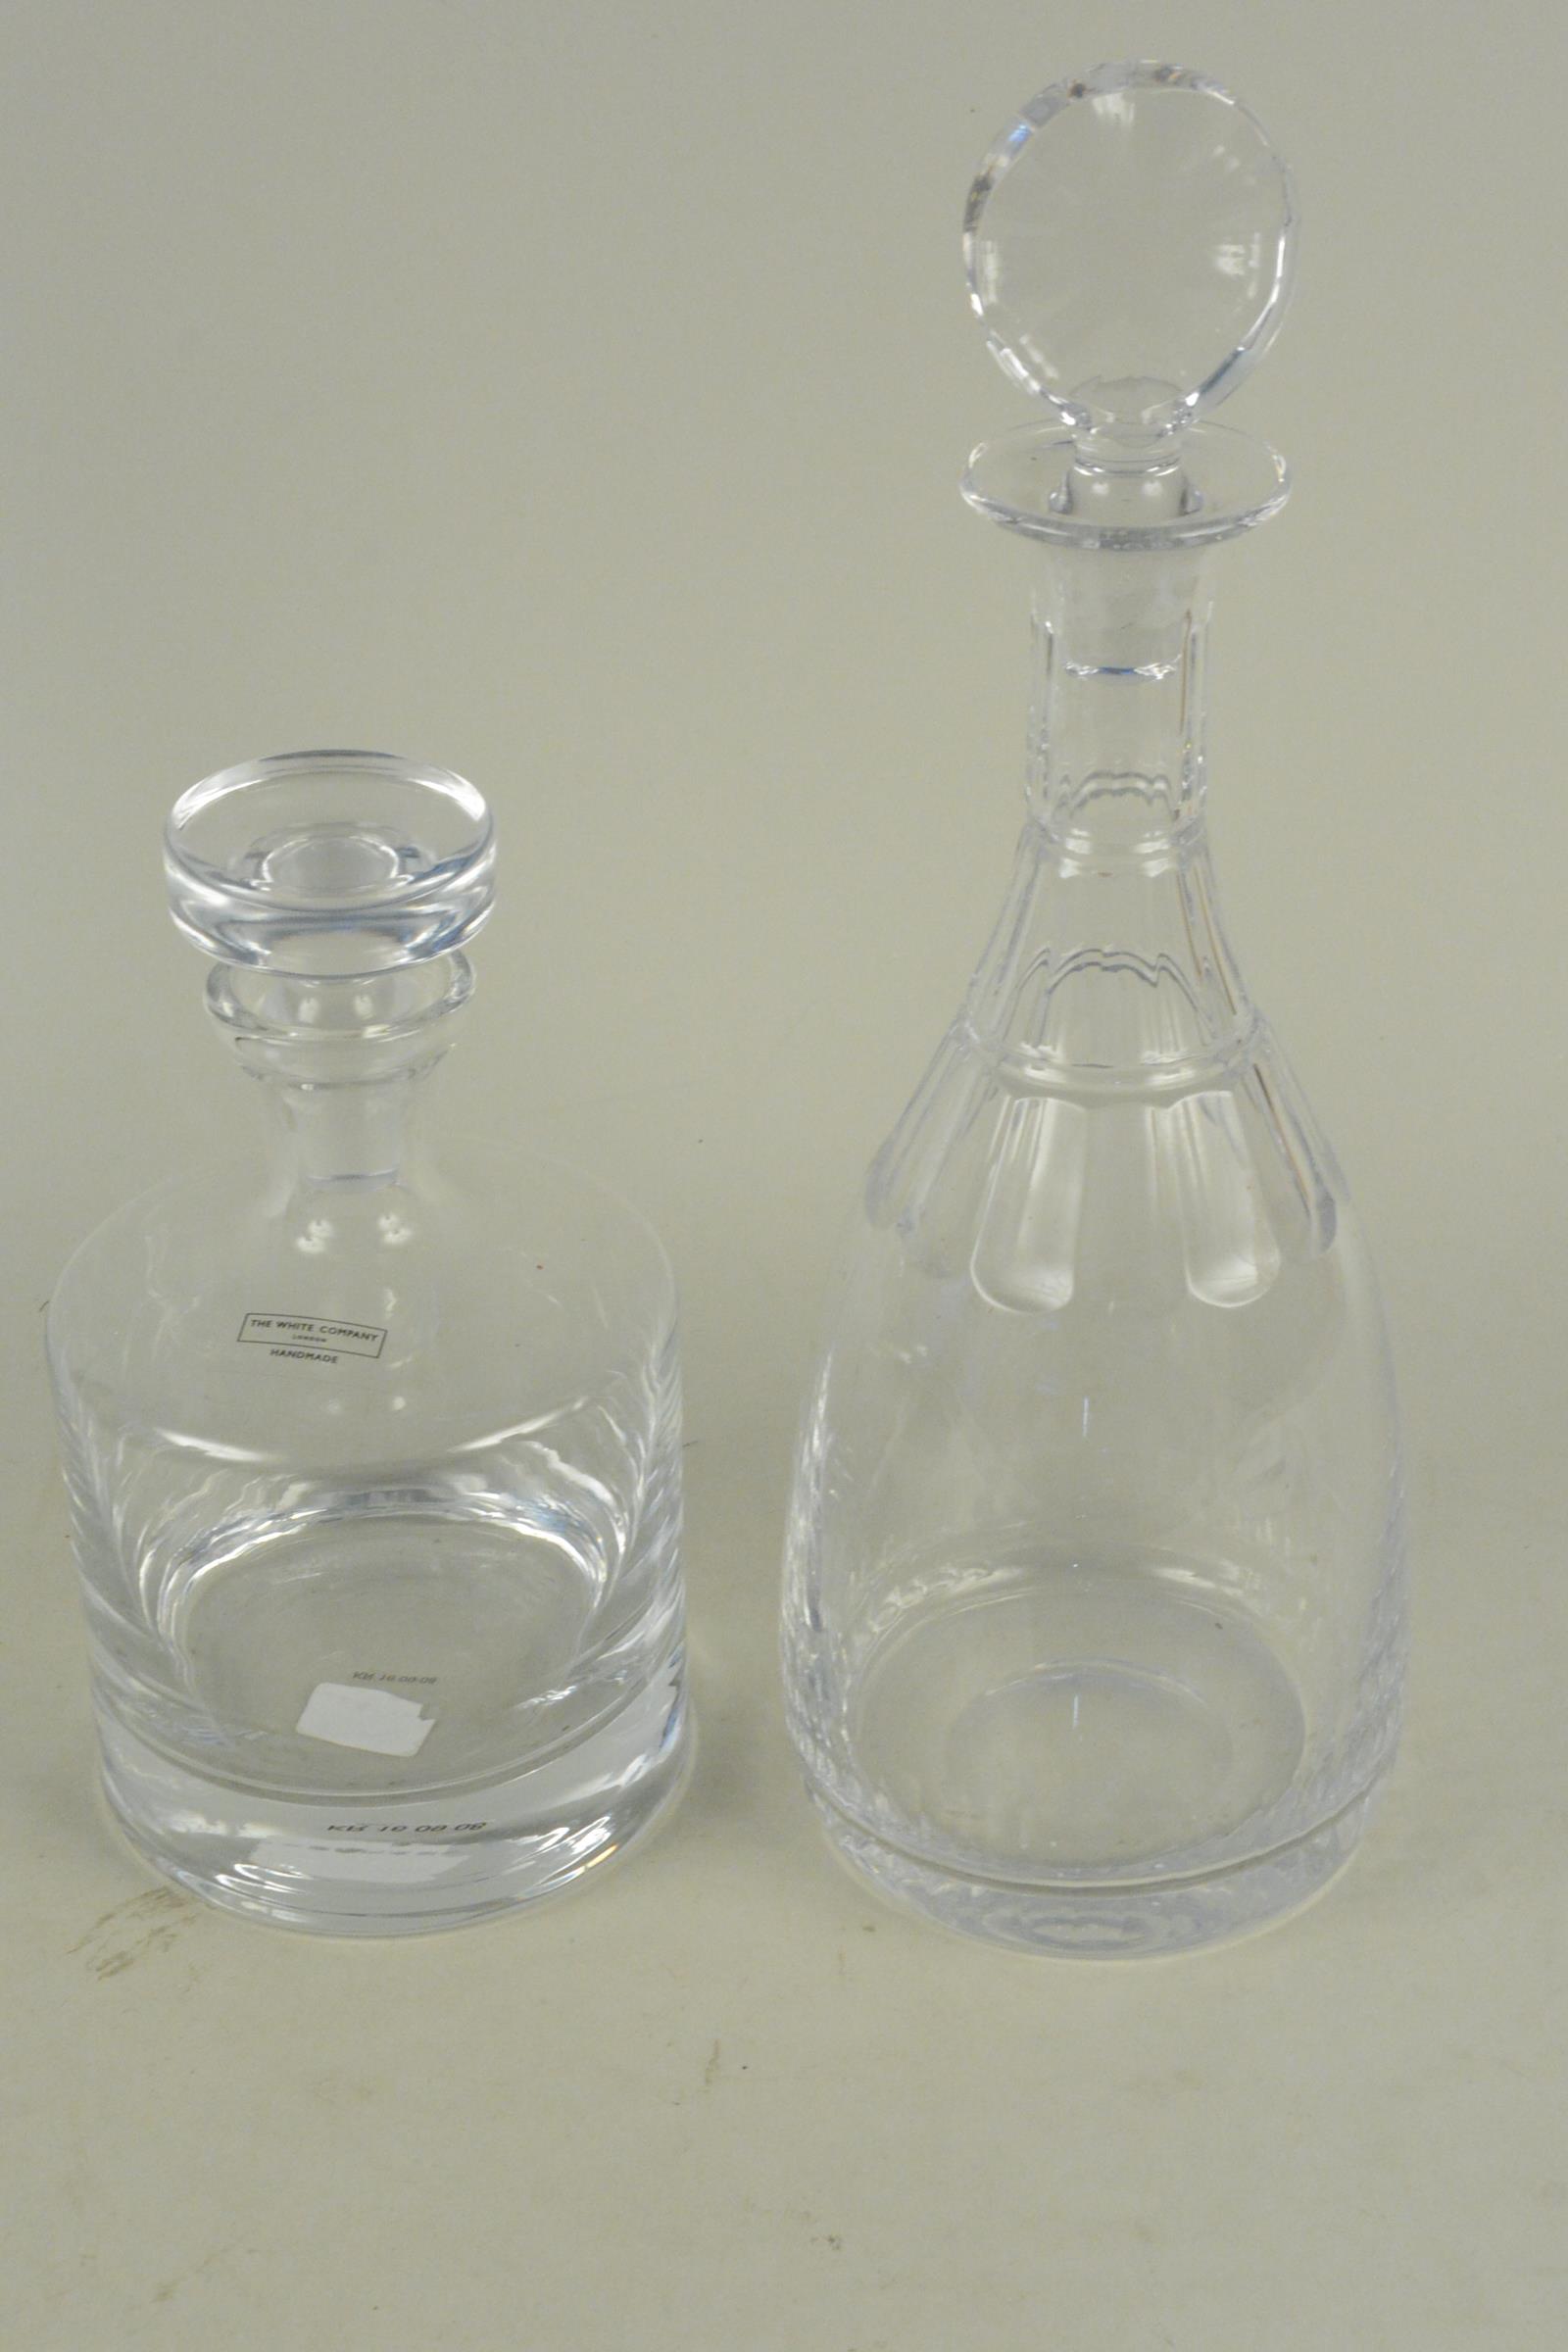 A 'White Company' handmade large decanter plus a William Yeoward Magnum decanter